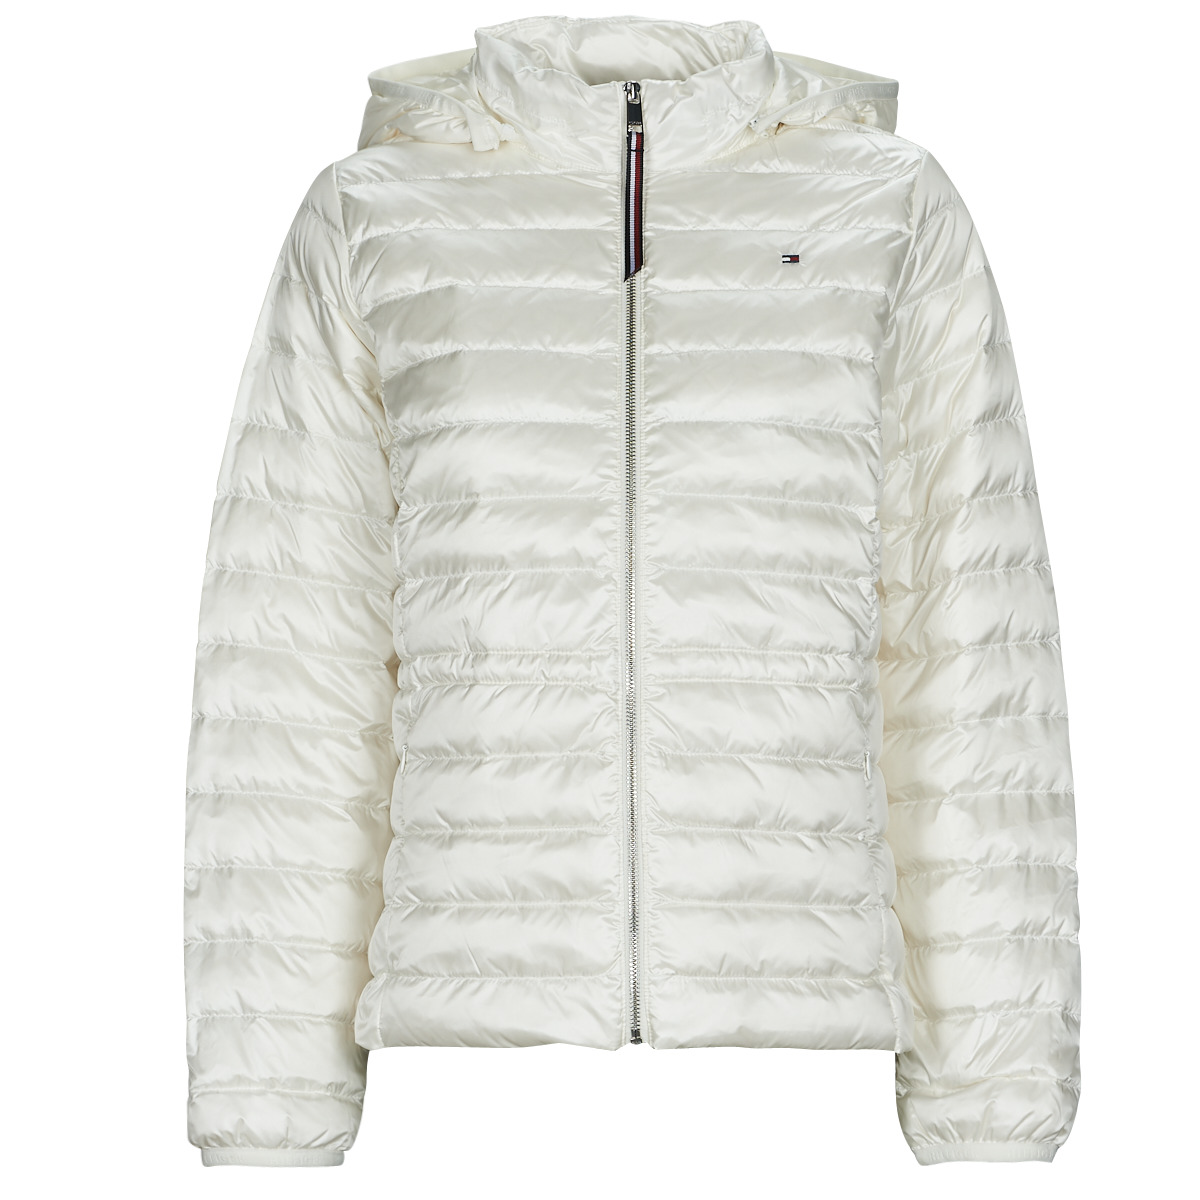 ! delivery FEMININE Women Hilfiger - DOWN Spartoo - Tommy | NET White Clothing Duffel LW Free JACKET coats